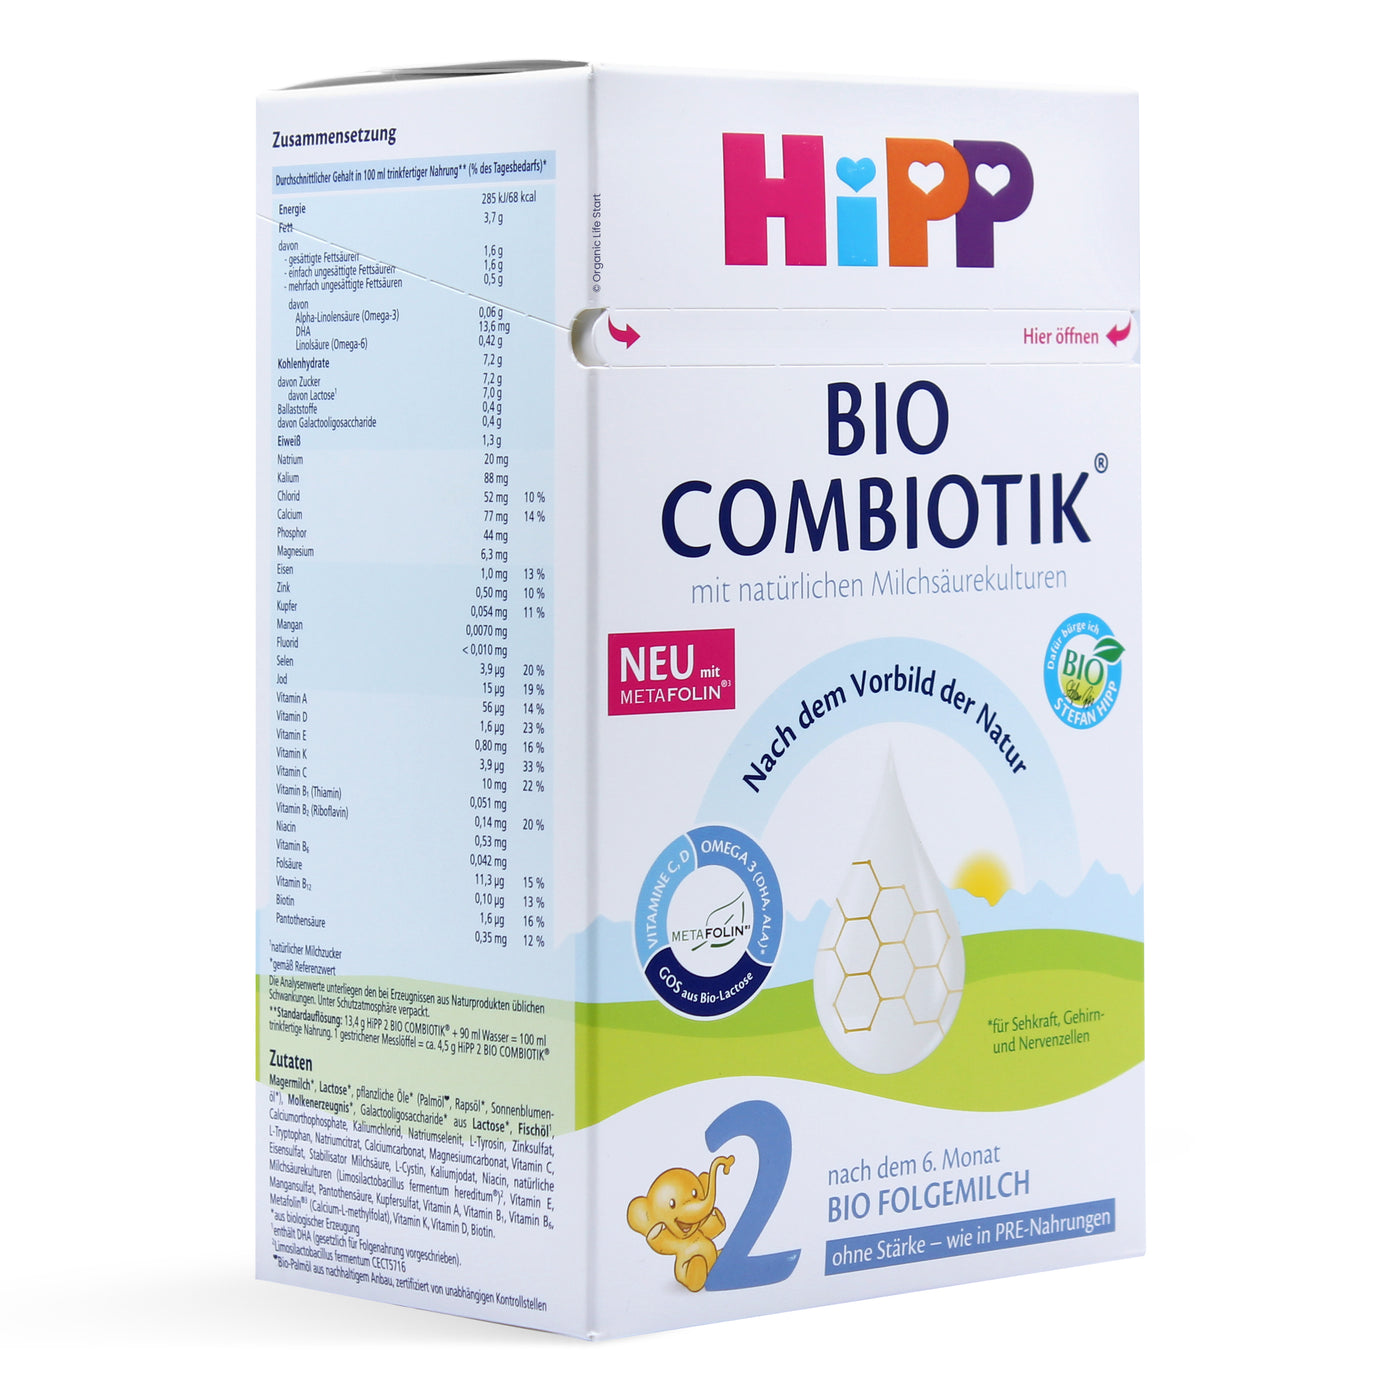 Hipp Organic Stage 2 Combiotic Follow On Formula From 6-12 Months 800 g  Online at Best Price, Baby milk powders & formula